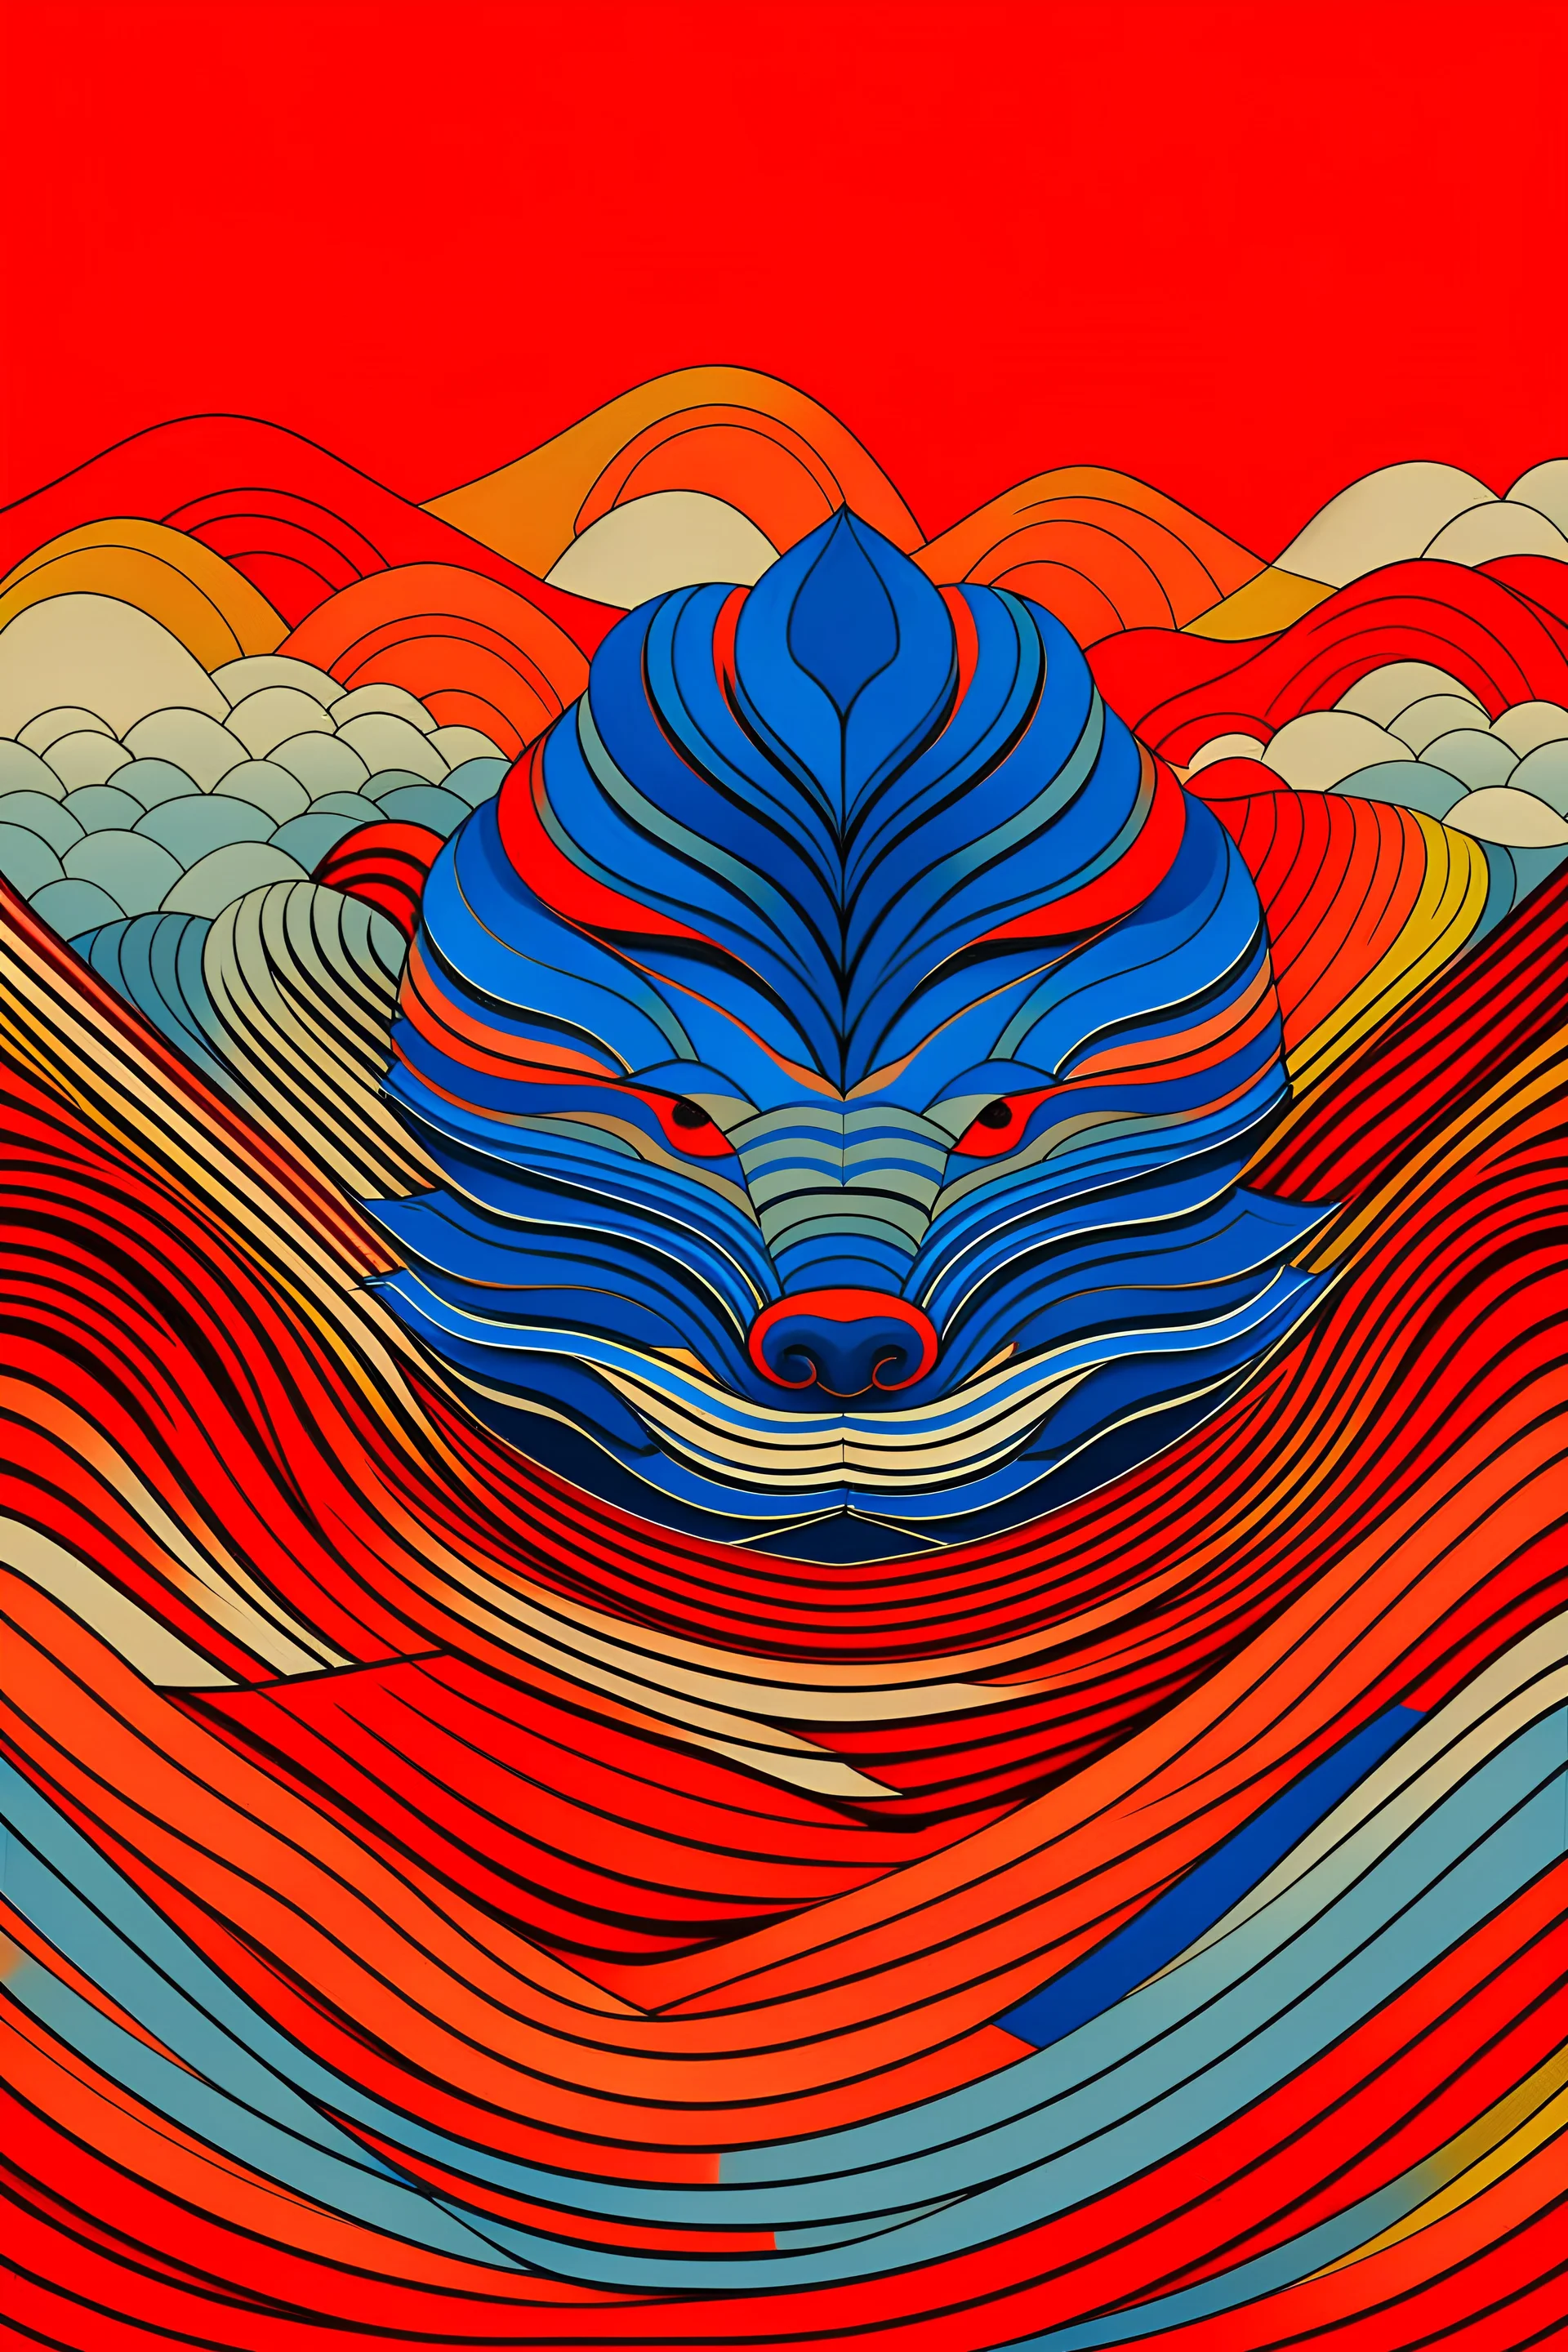 The elements of radio waves are used to form an abstract pattern of simple lines of a Picasso-style Chinese dragon head. The overall image is a frontal view and the colours are mainly red, blue and orange.